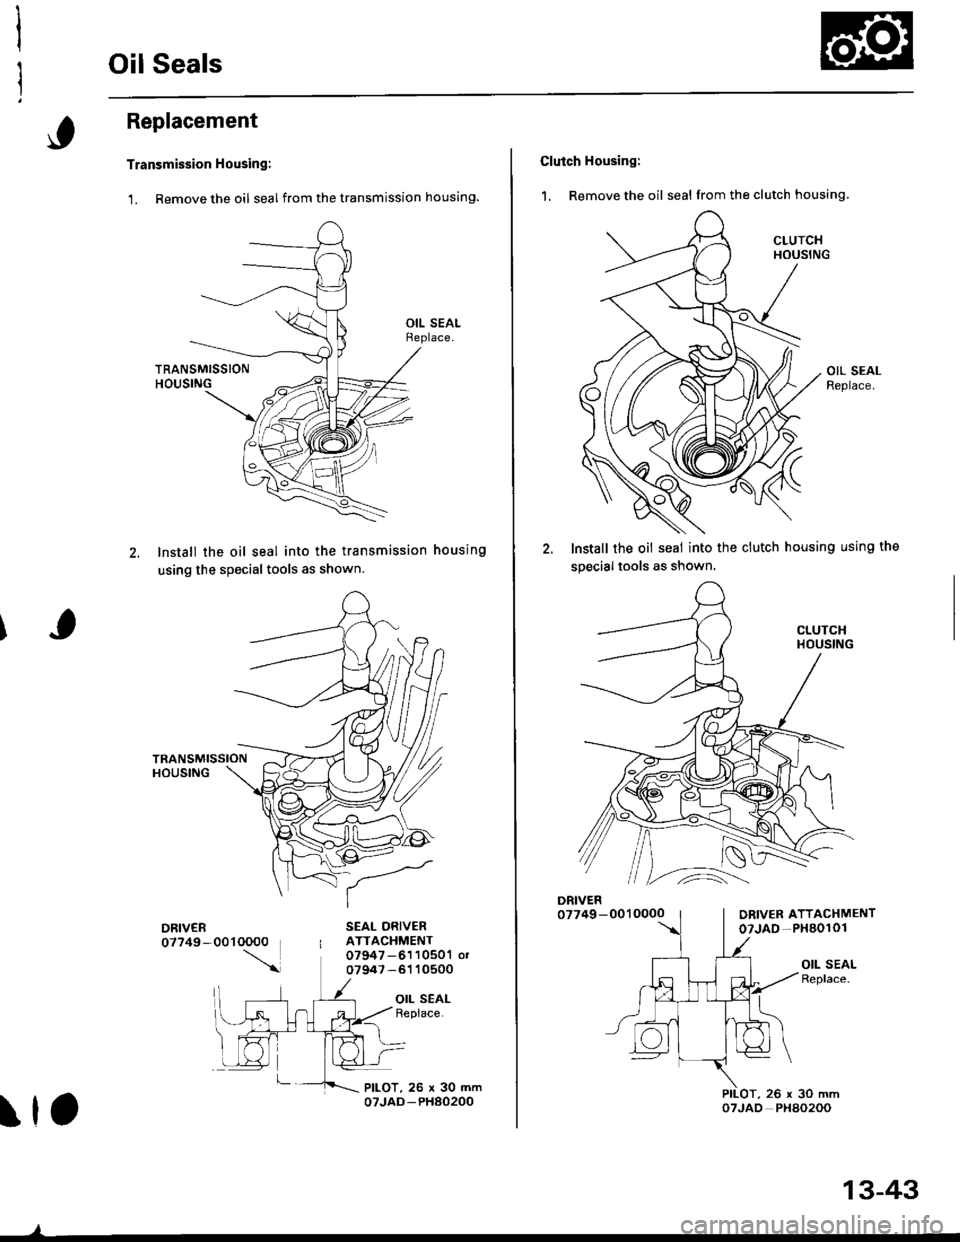 HONDA CIVIC 2000 6.G Workshop Manual Oil Seals
Replacement
Transmission Housing:
1. Remove the oil seal from the transmission housing.
lnstall the oil seal into the transmission housing
using the special tools as shown.
SEAL ORIVERATTACH